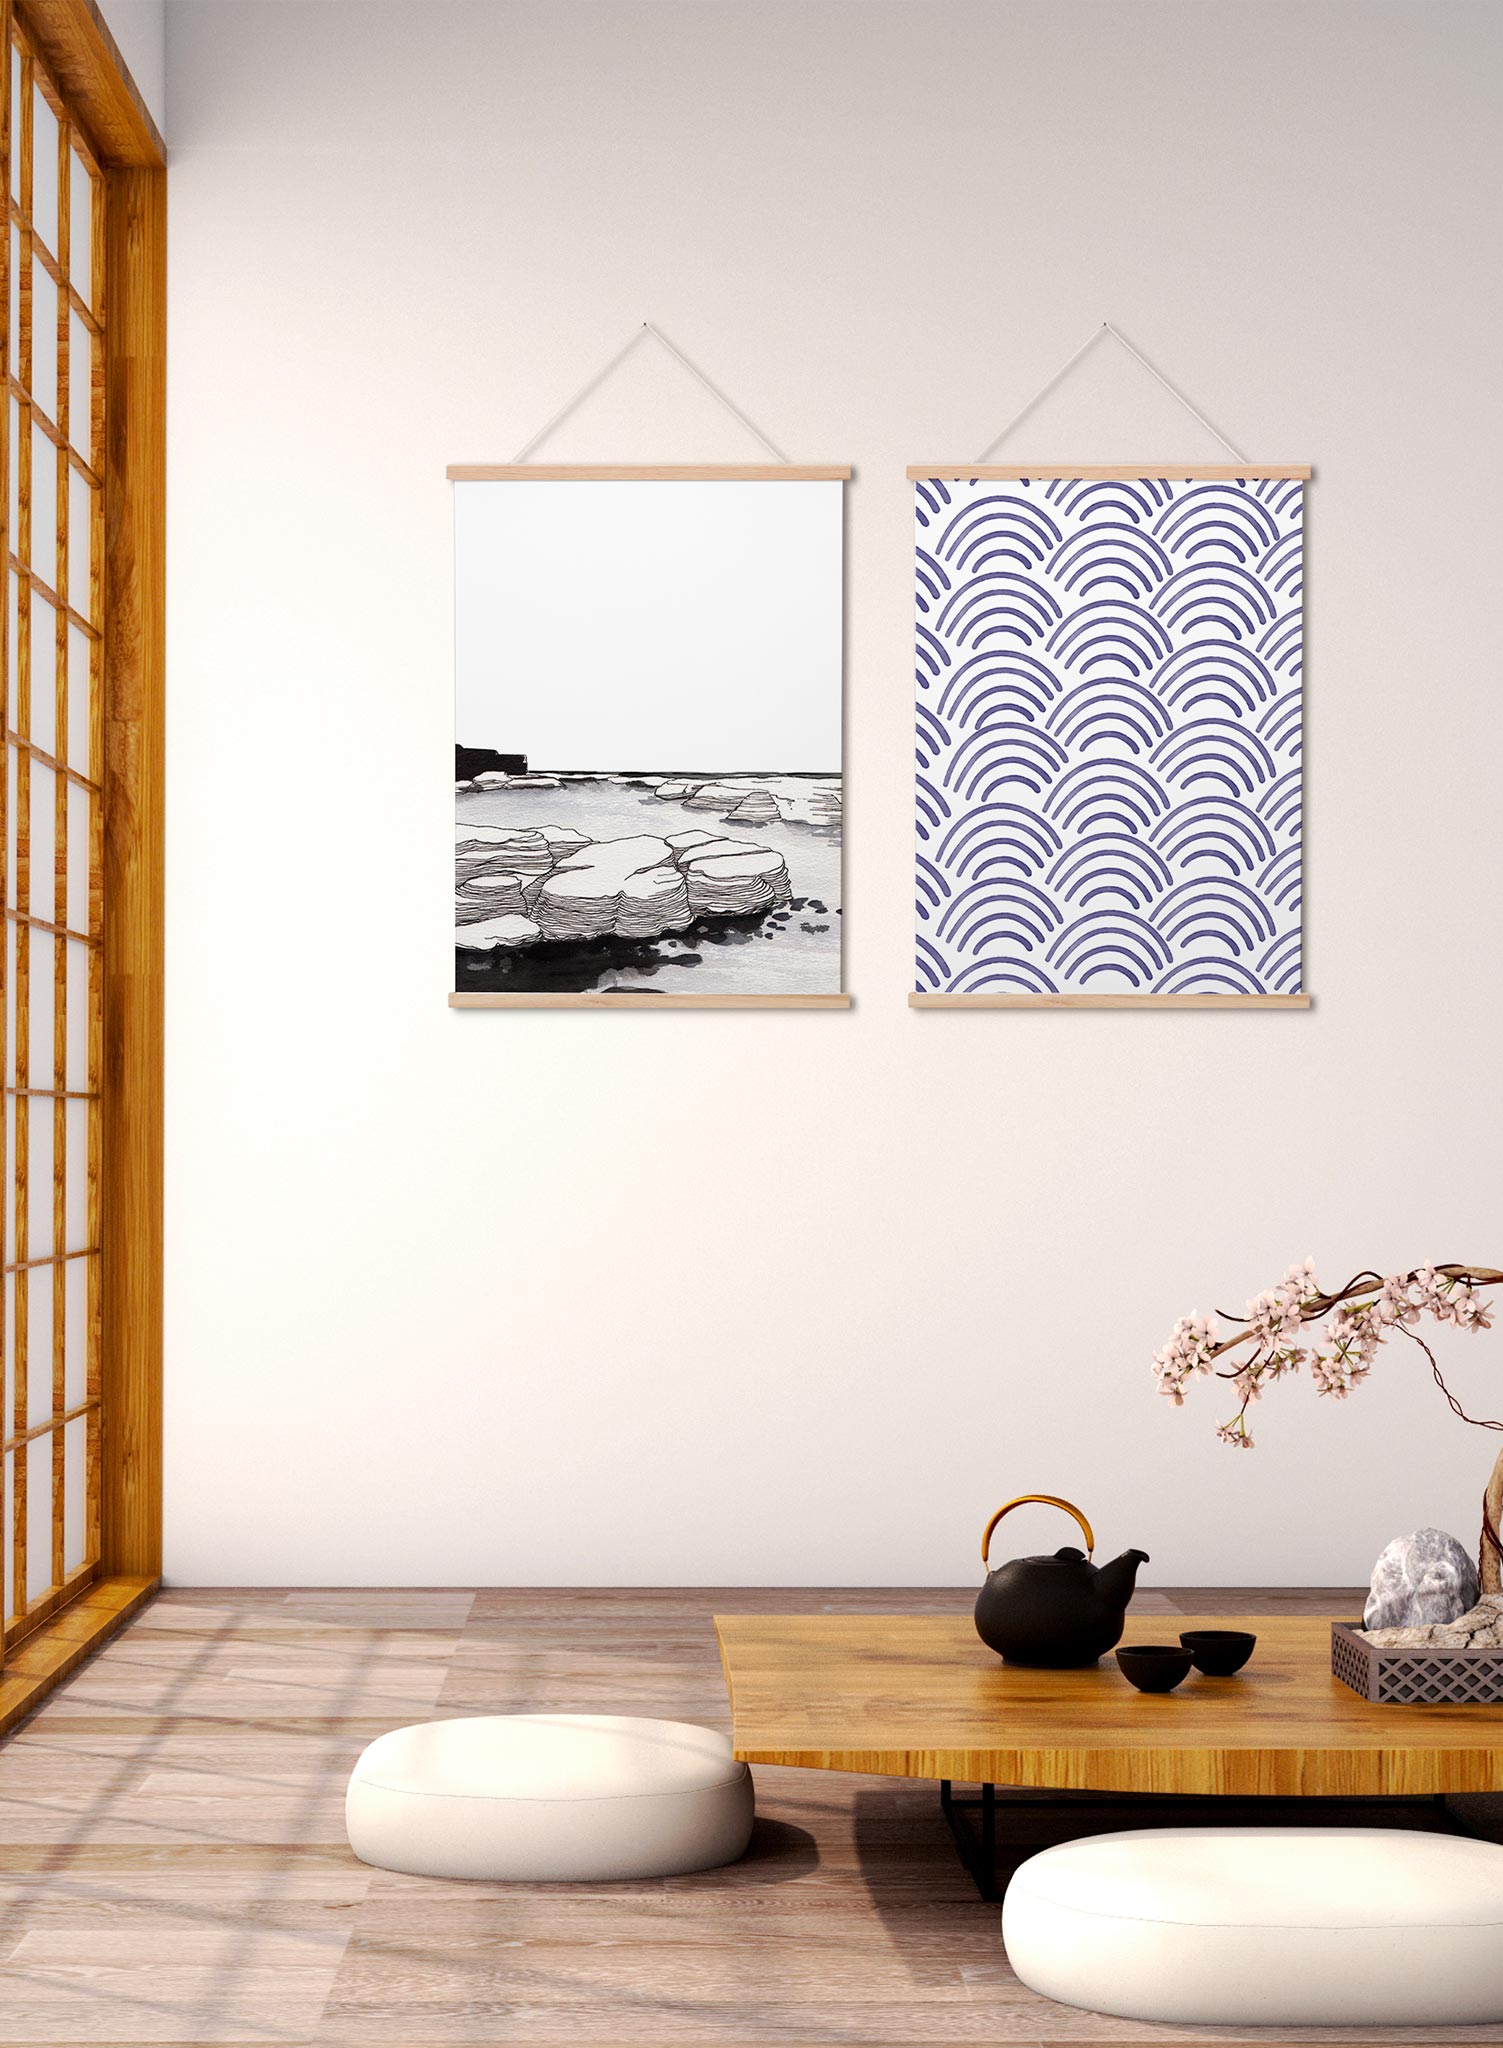 Izu Peninsula is a minimalist illustration by Opposite Wall of a hand drawn of a ocean view with big rocks.